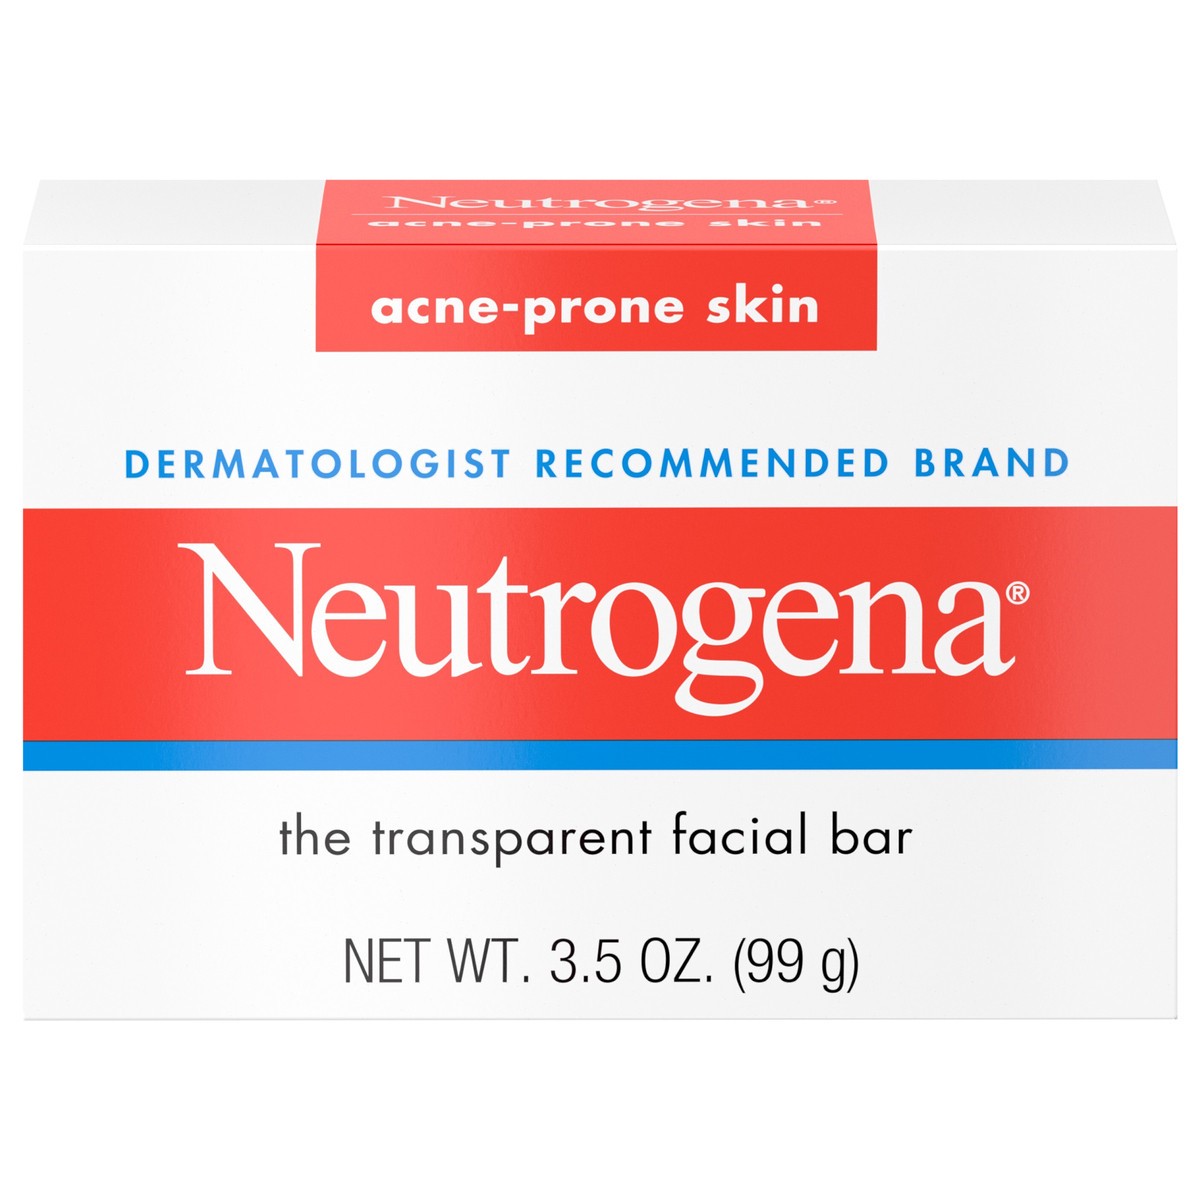 slide 1 of 8, Neutrogena Facial Cleansing Bar Treatment for Acne-Prone Skin, Non-Medicated & Glycerin-Rich Formula Gently Cleanses without Over-Drying, No Detergents or Dyes, Non-Comedogenic, 3.5 oz, 3.5 oz